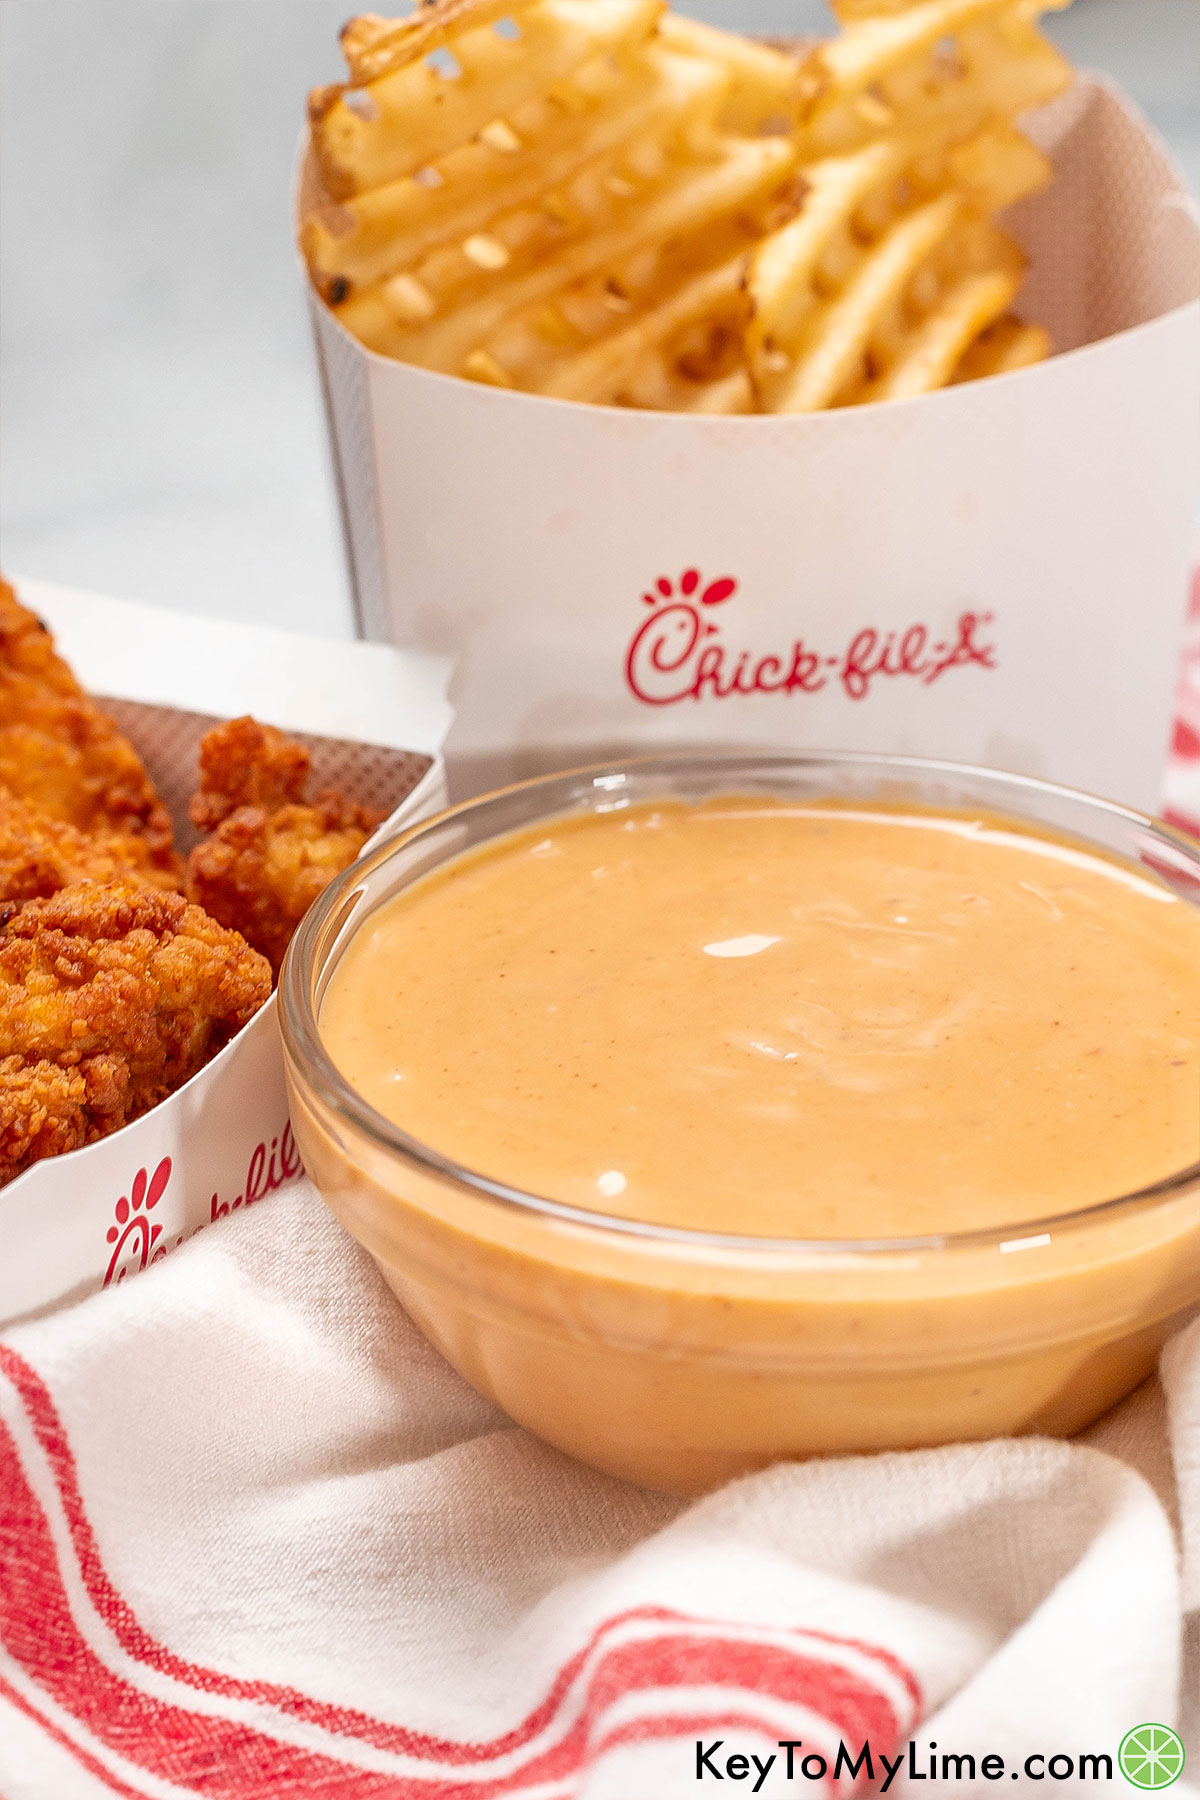 A side image of a medium sized glass bowl filled with freshly mixed sauce with a box of chicken tenders and waffle fries in the background.